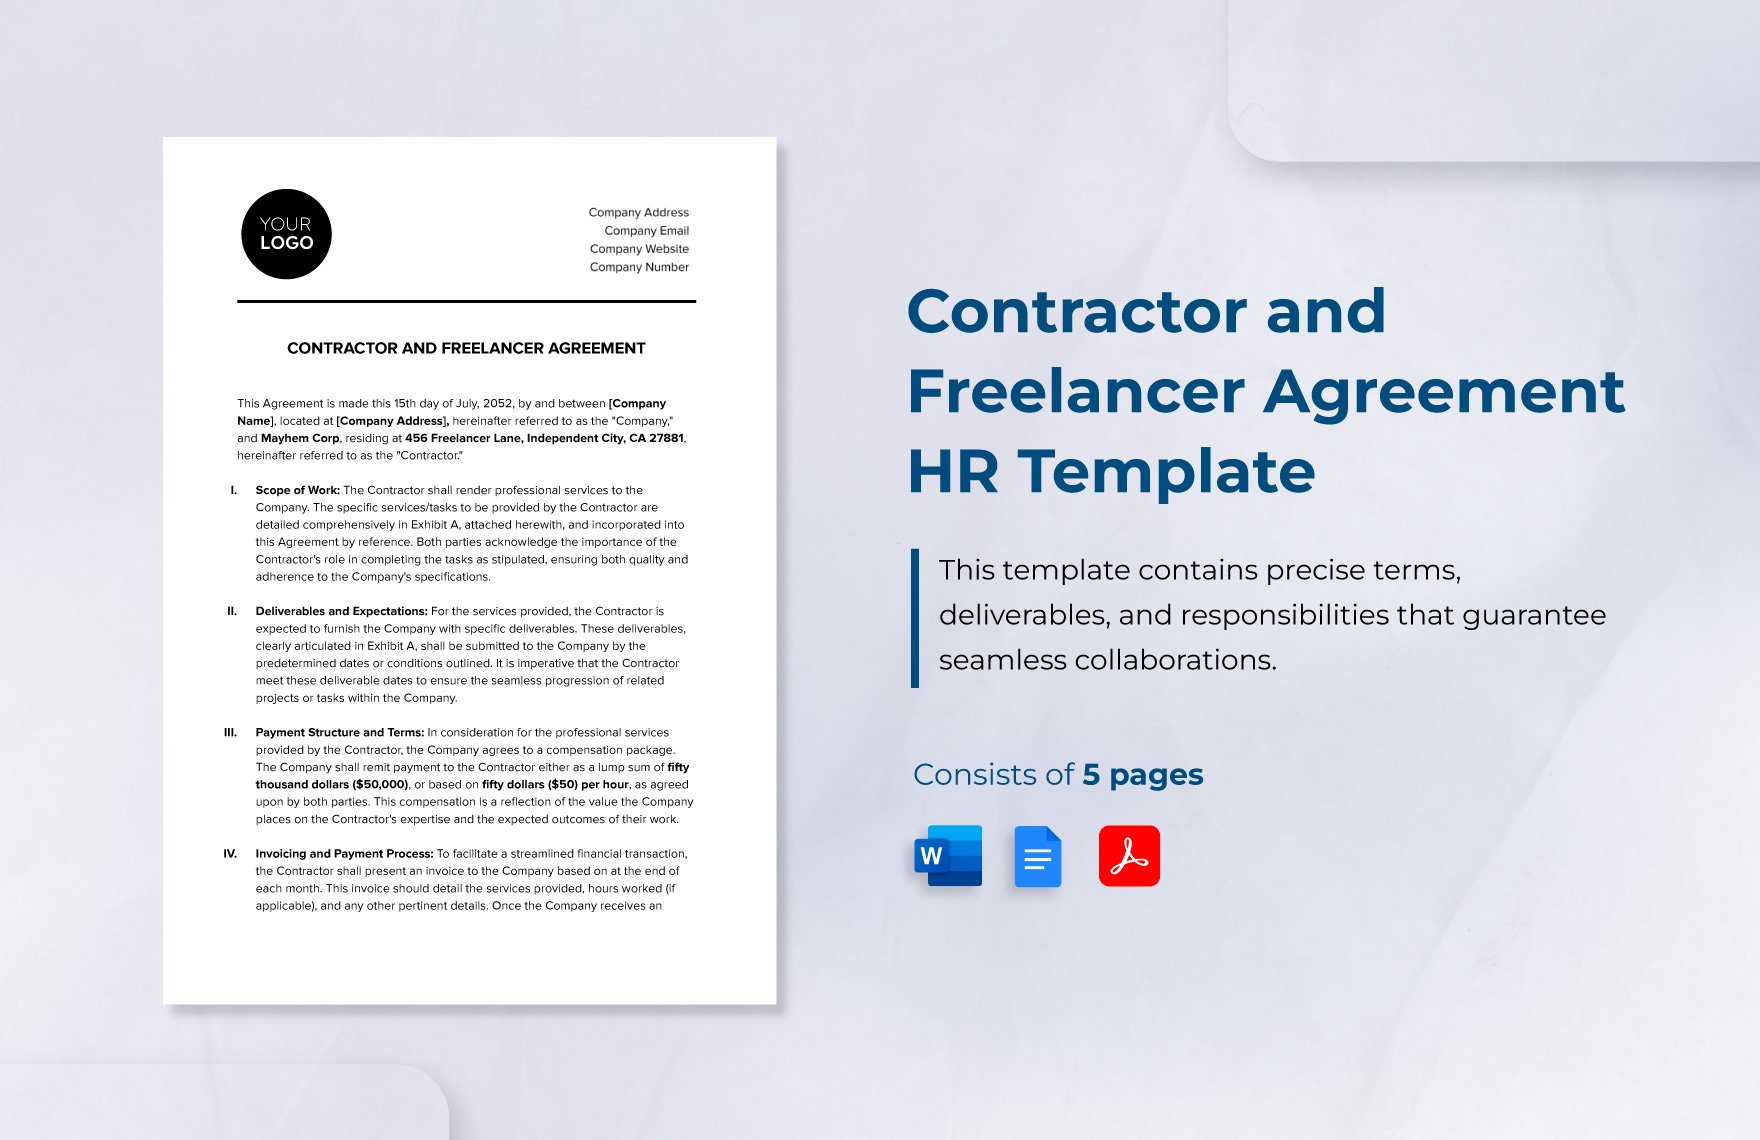 Contractor and Freelancer Agreement HR Template